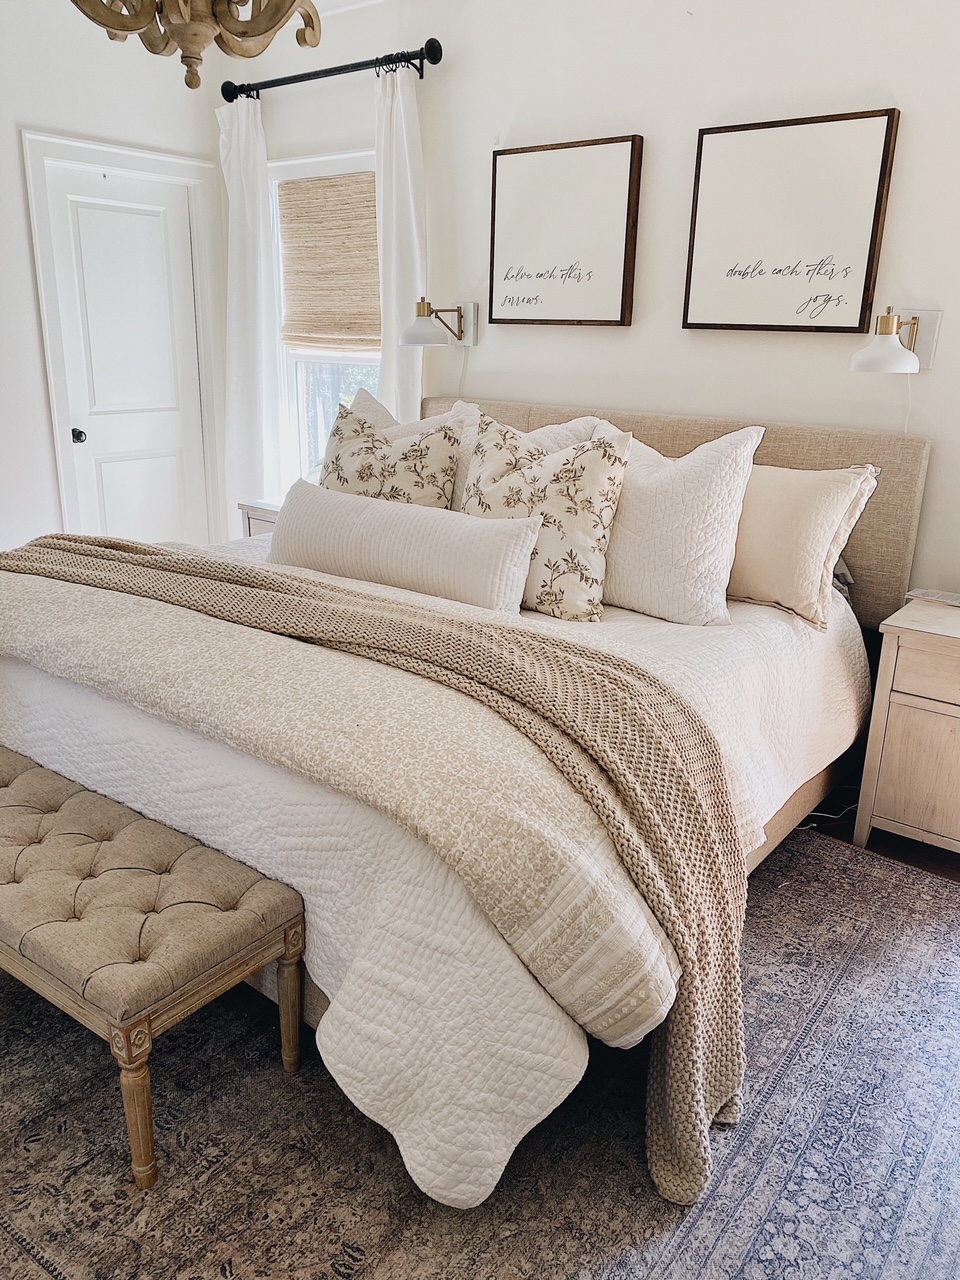 Neutral, layered bedding 🤎🥥  Neutral bedroom decor, Cream and